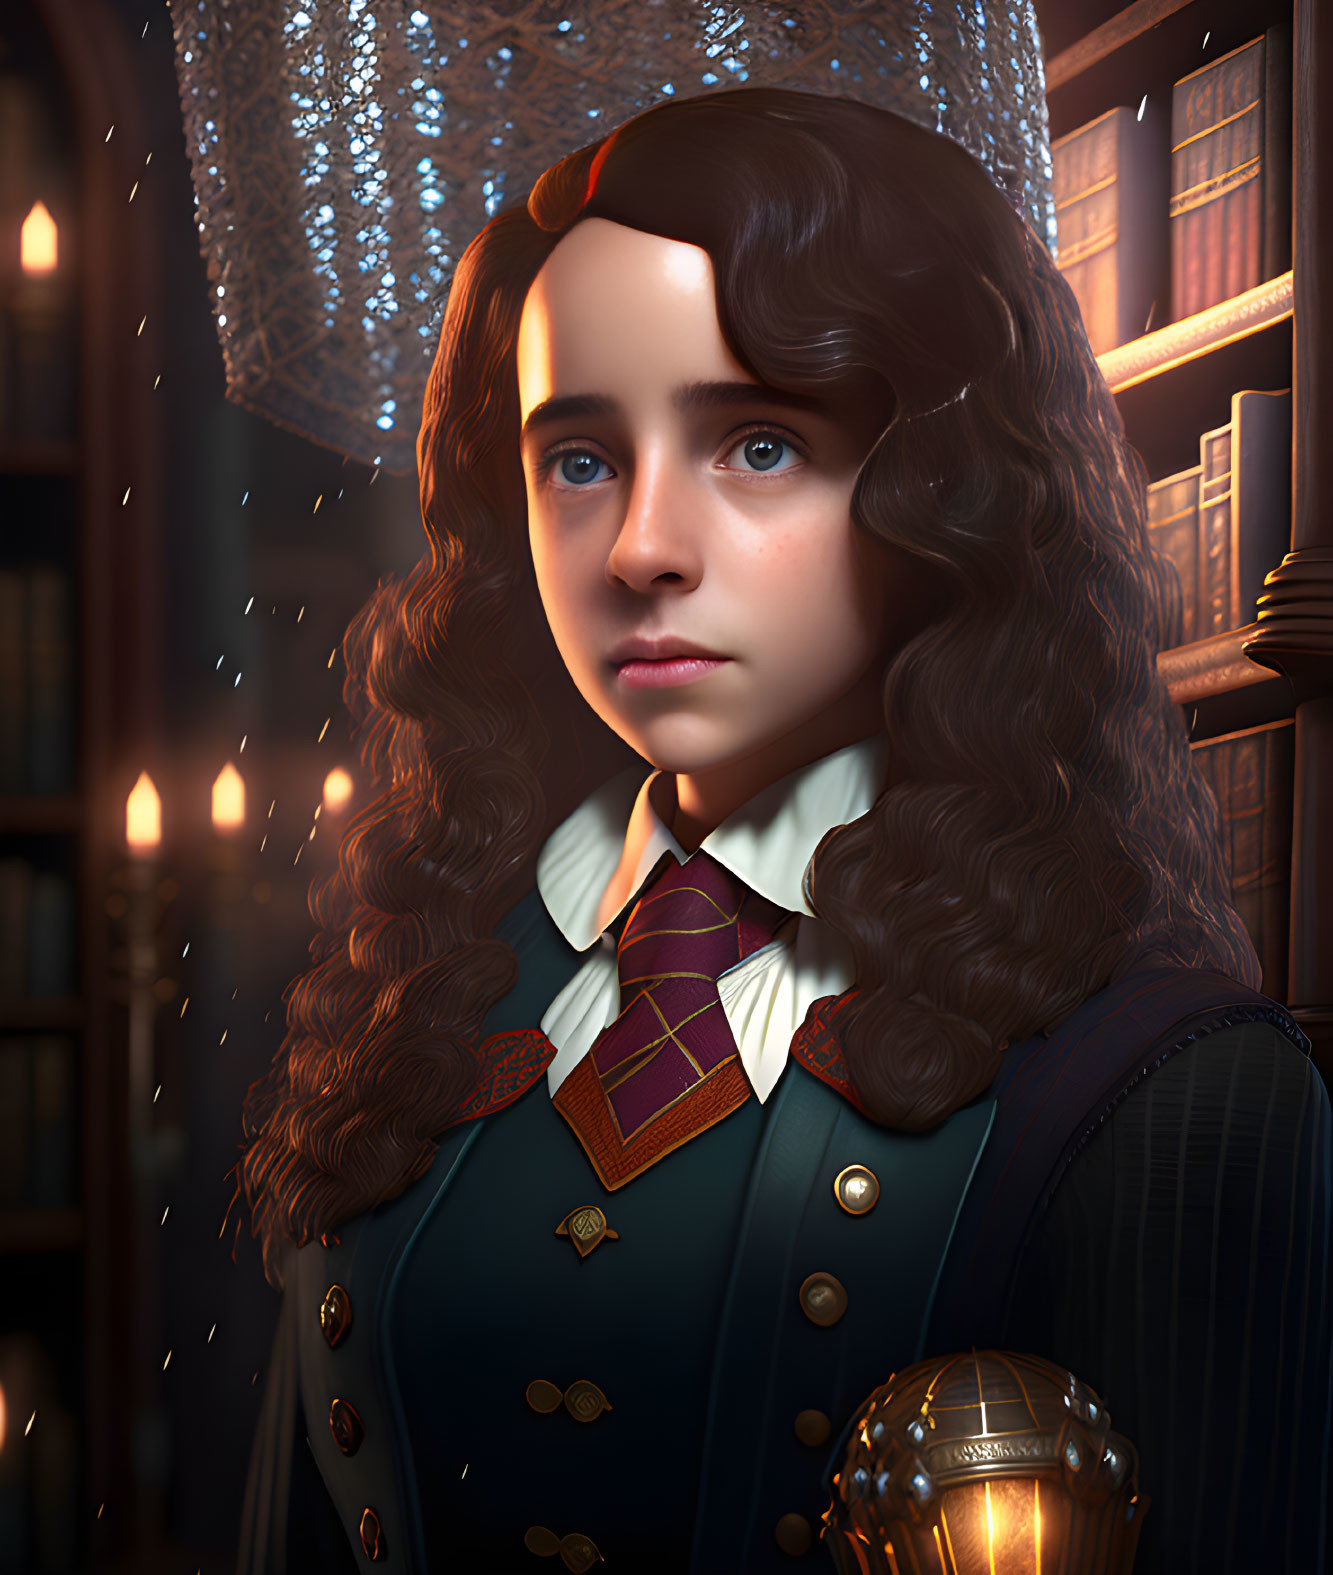 Young girl in Hogwarts uniform in magical library setting